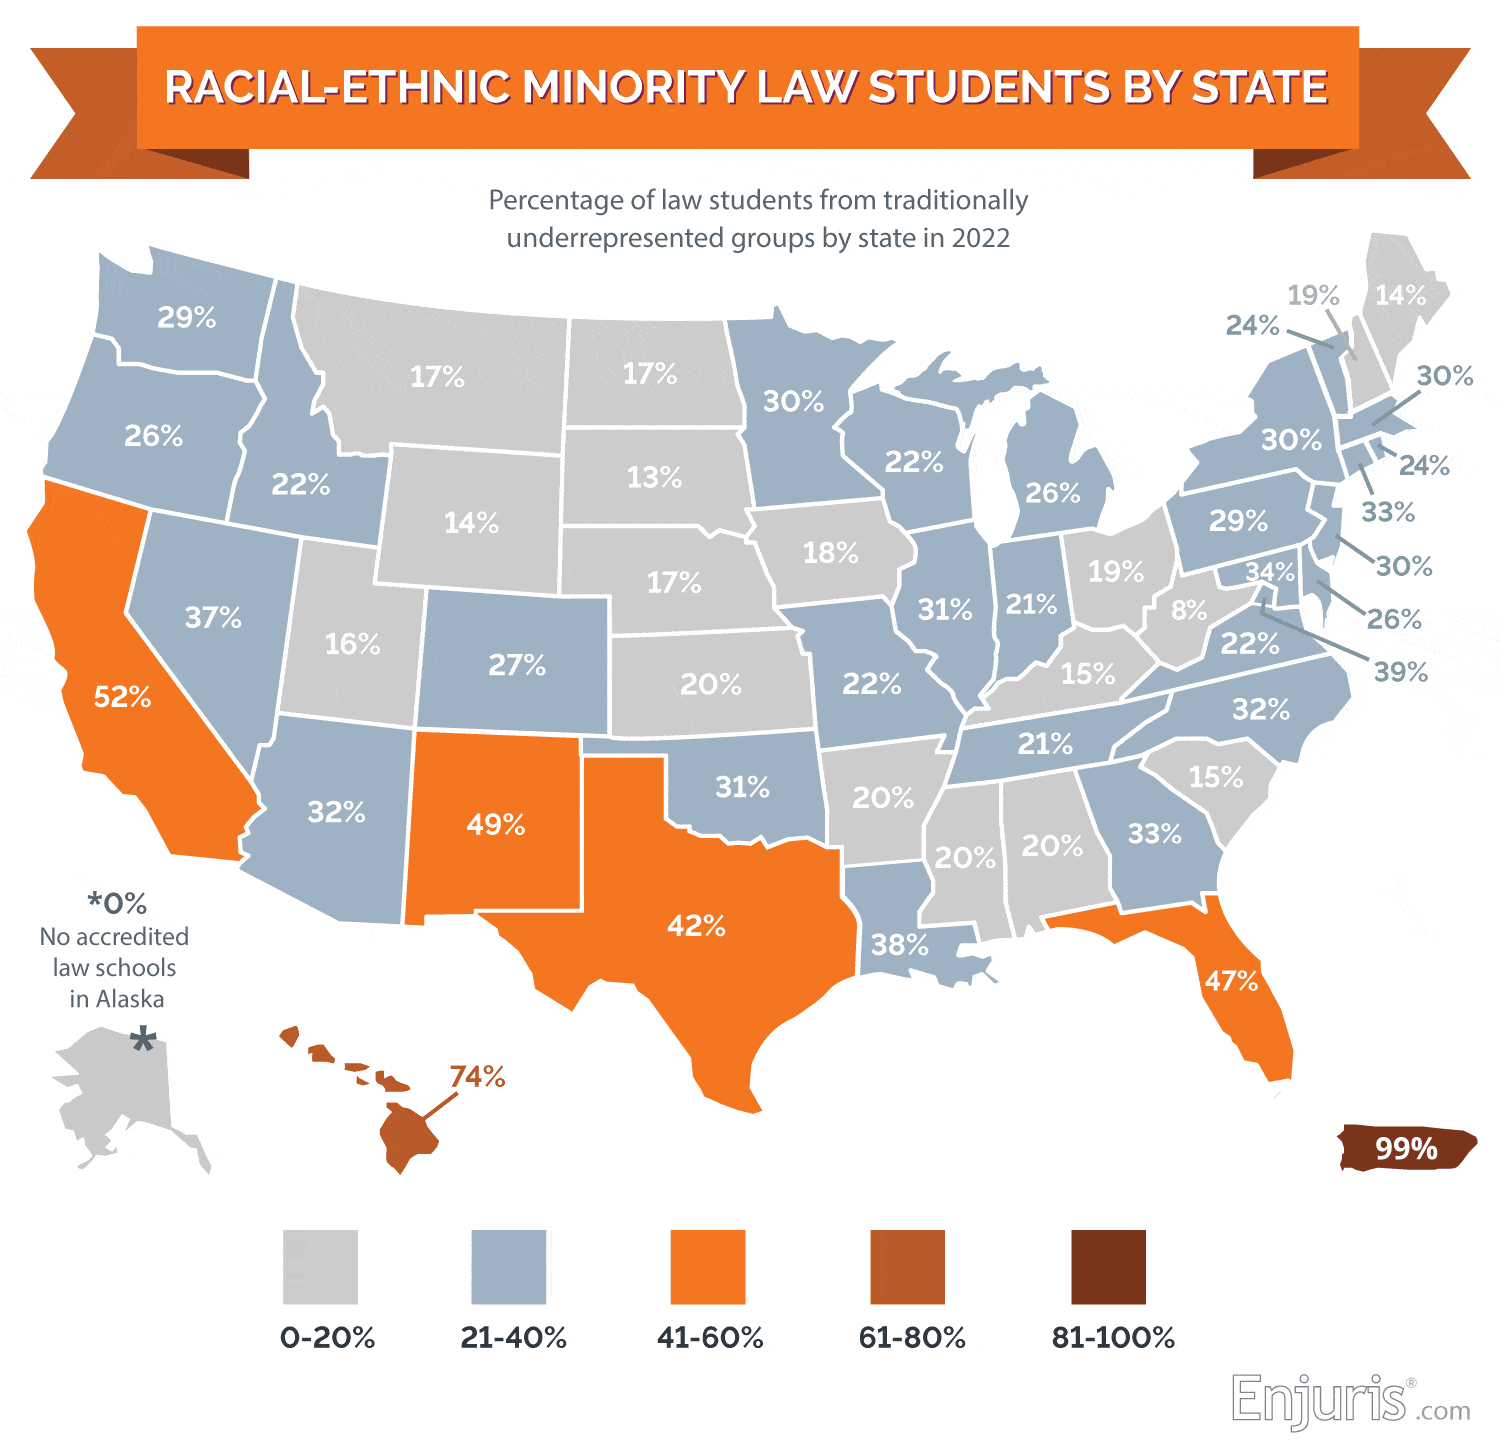 Law school race & ethnicity composition in 2022